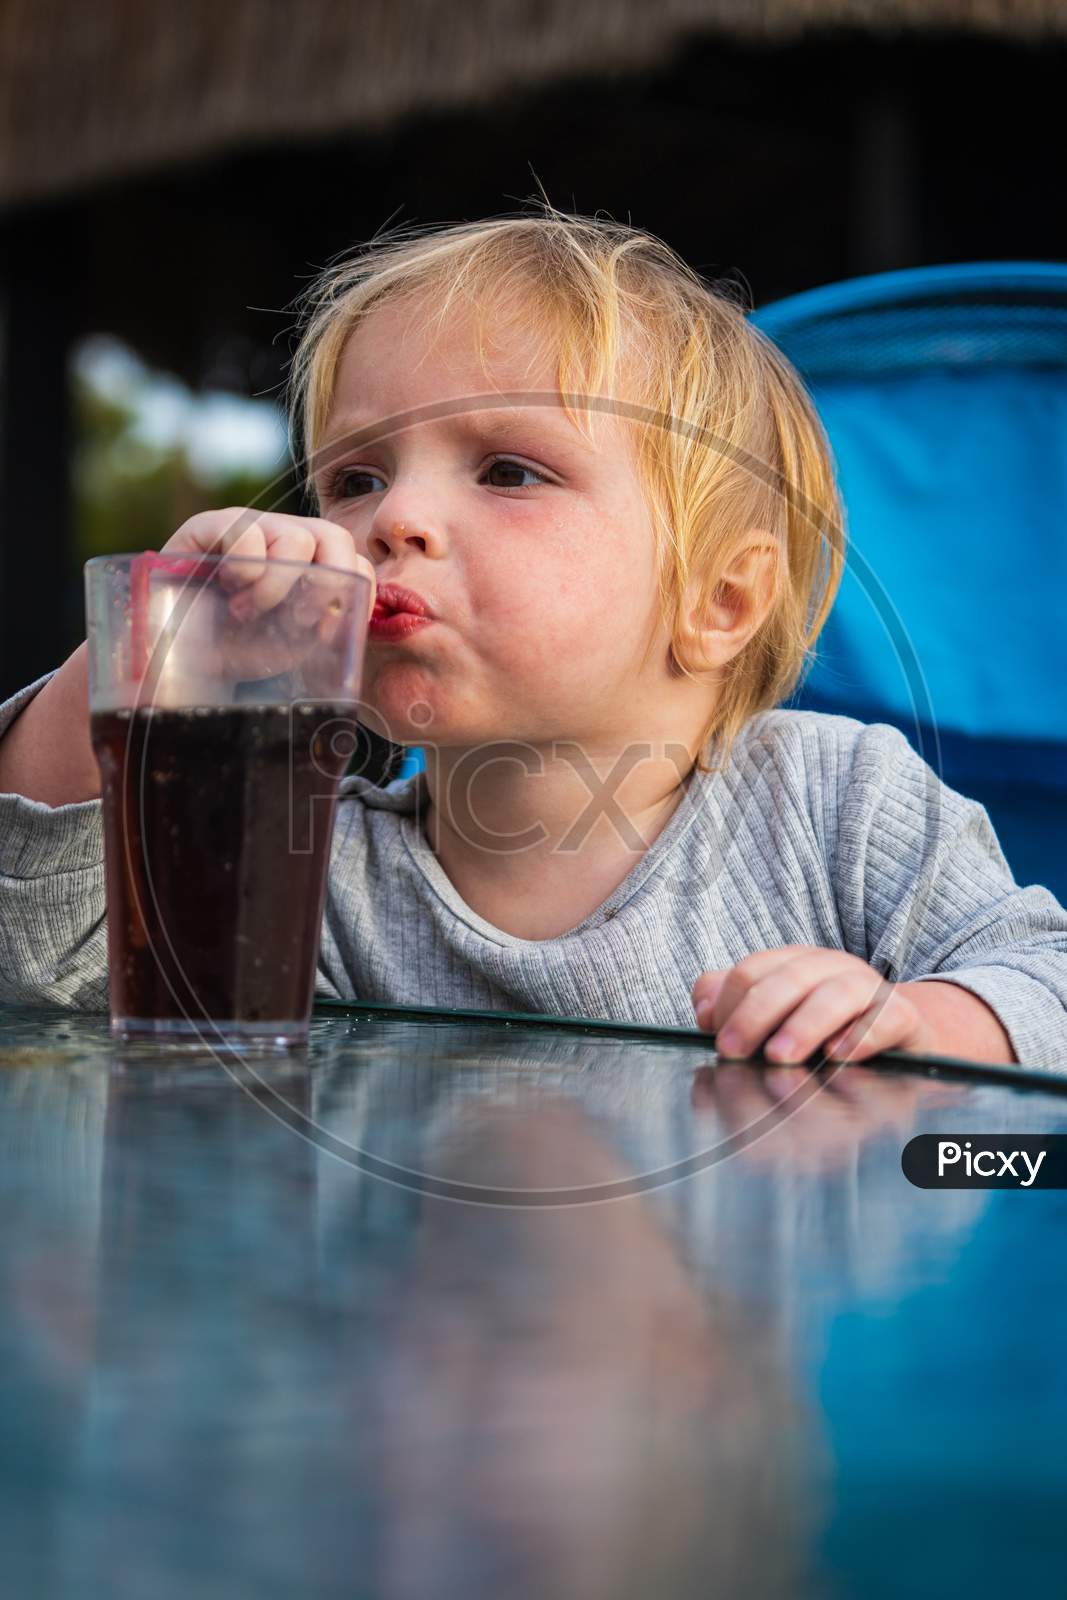 A Little Boy Is Sitting On A Chair And Happily Drinks Sparkling Water From A Glass Through A Straw. Feeding Process. The Baby Is Learning To Eat. Baby Food, Family, Child, Food